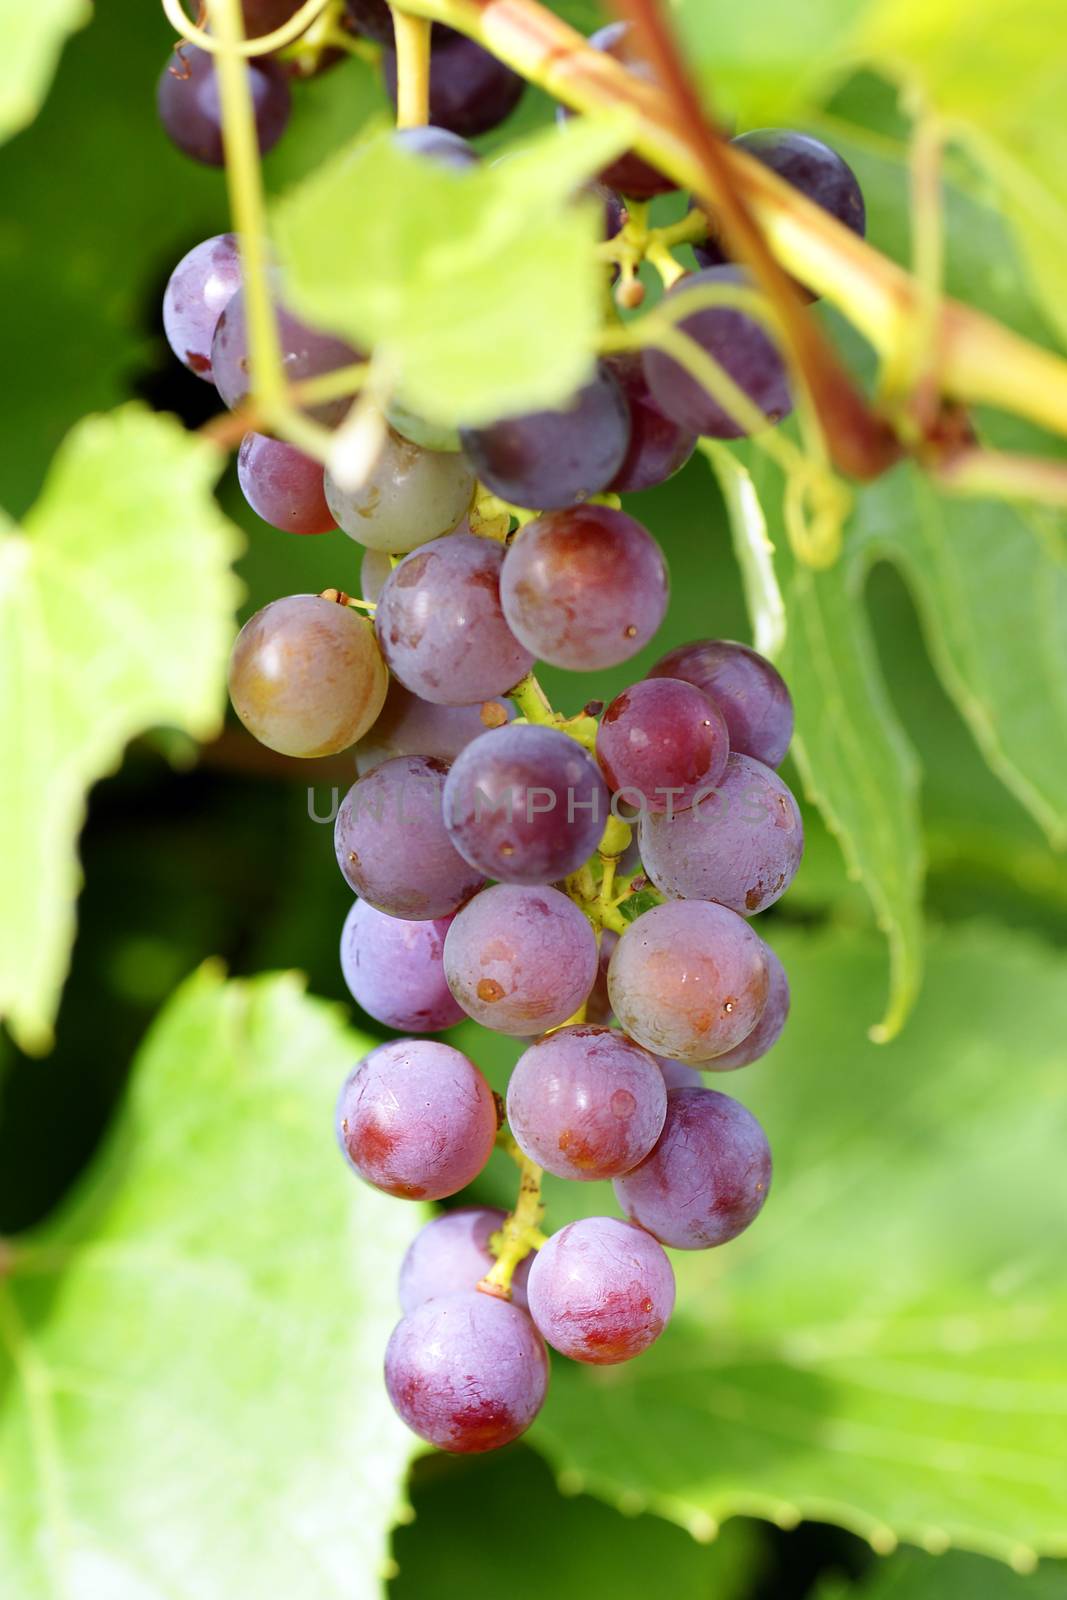 Grapes on the vine by Mirage3